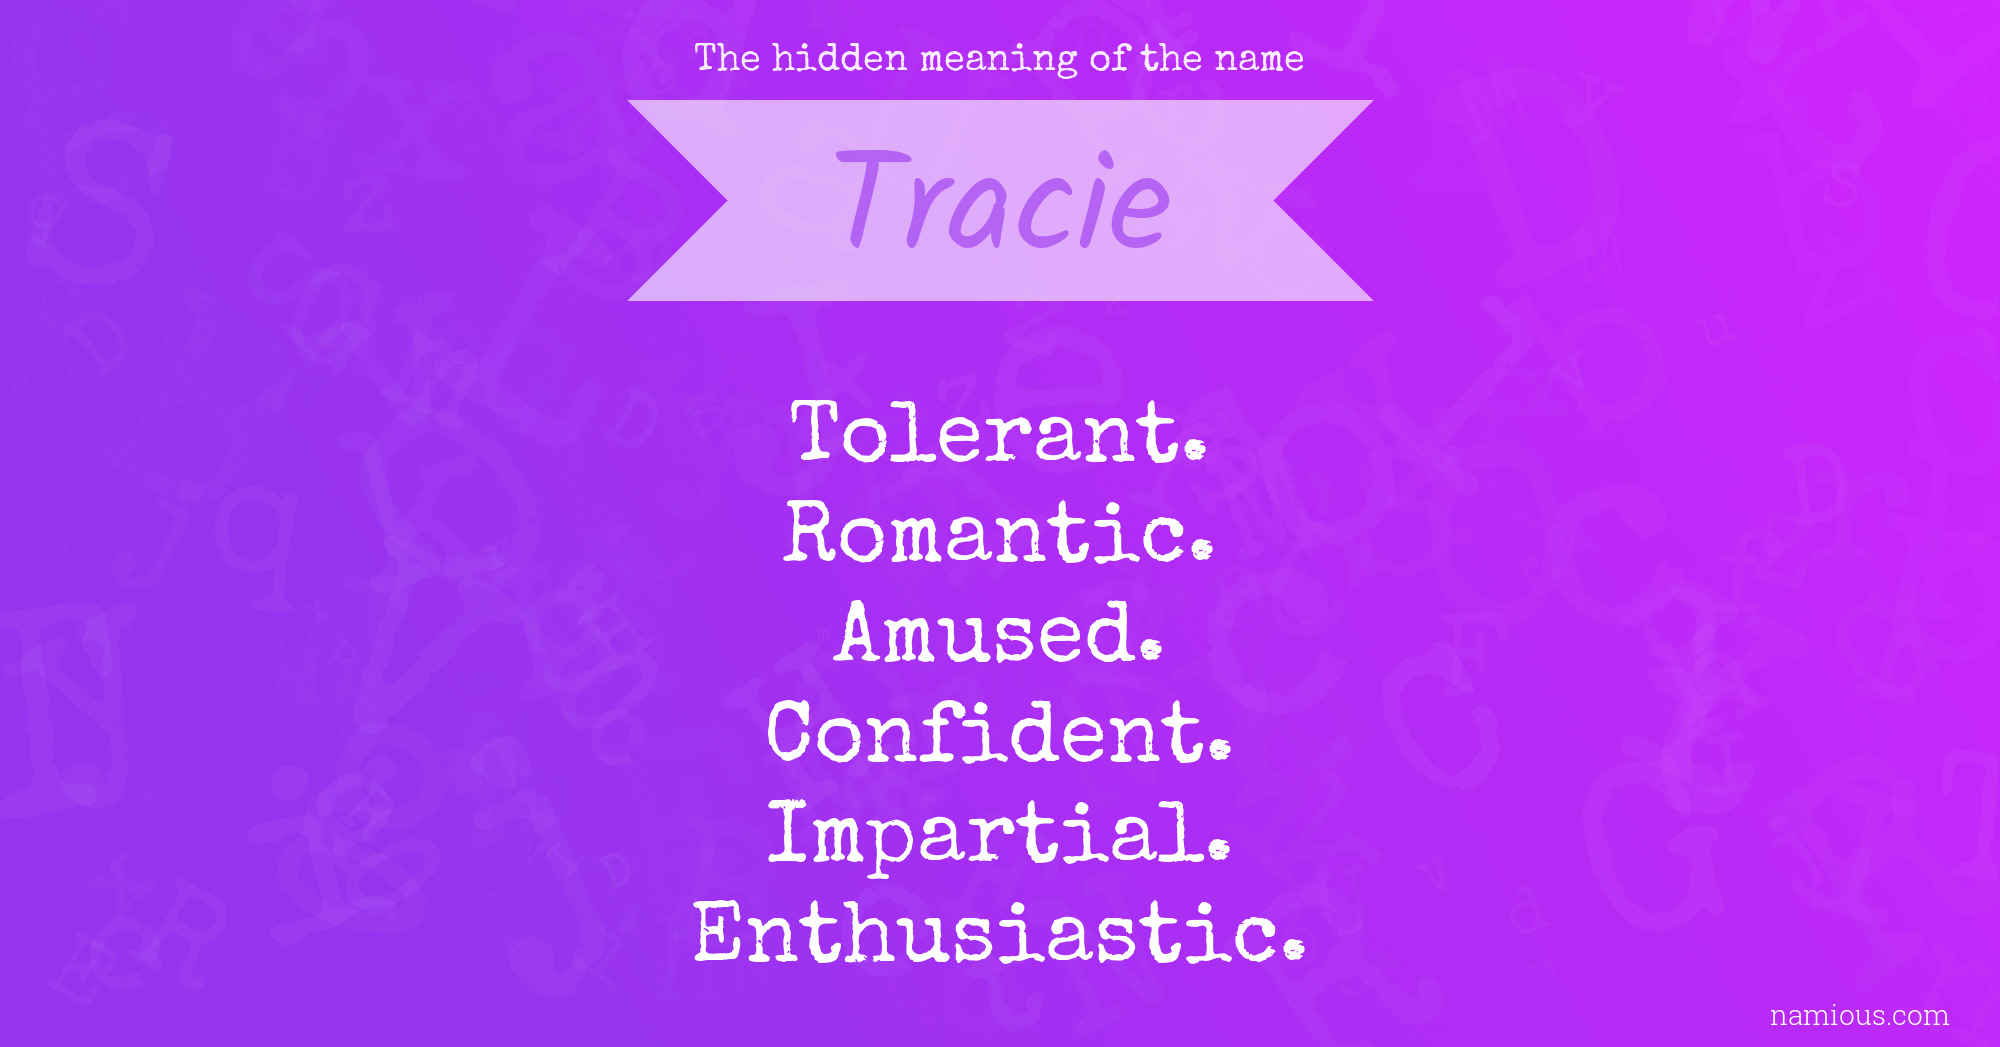 The hidden meaning of the name Tracie